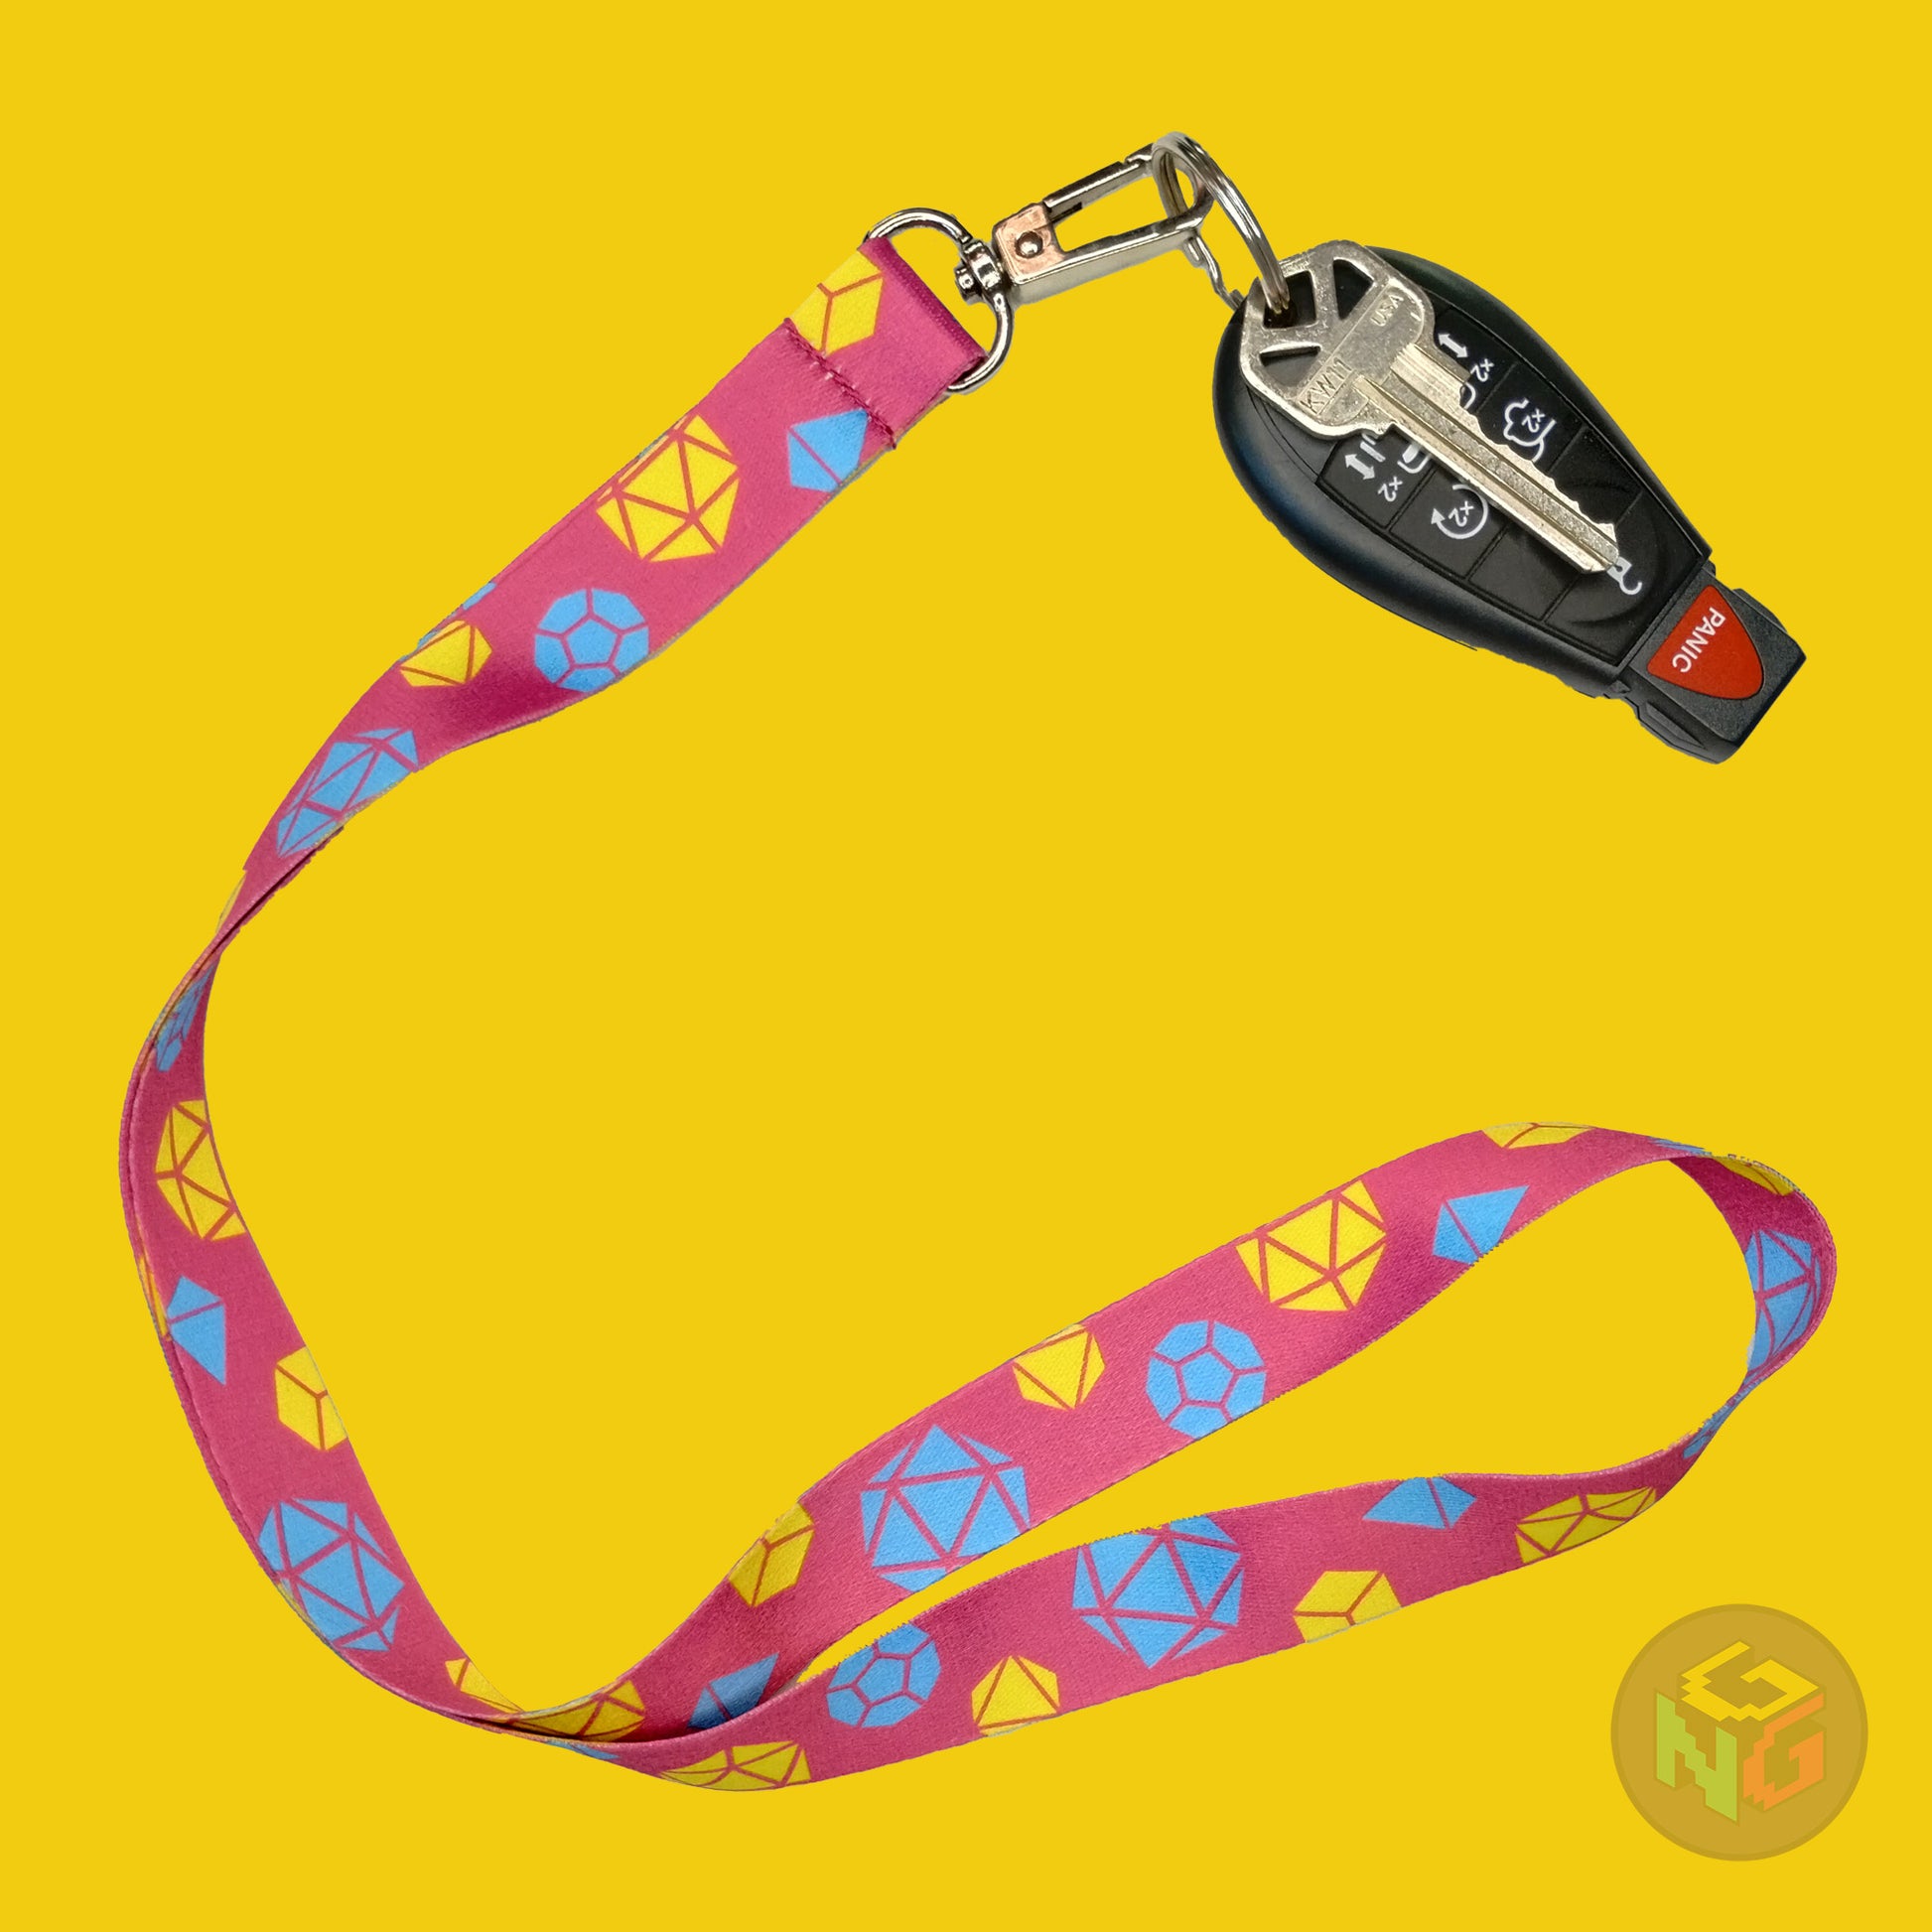 pink dnd pansexual lanyard showing the blue and yellow tabletop dice with a key fob clipped to the end of the lanyard